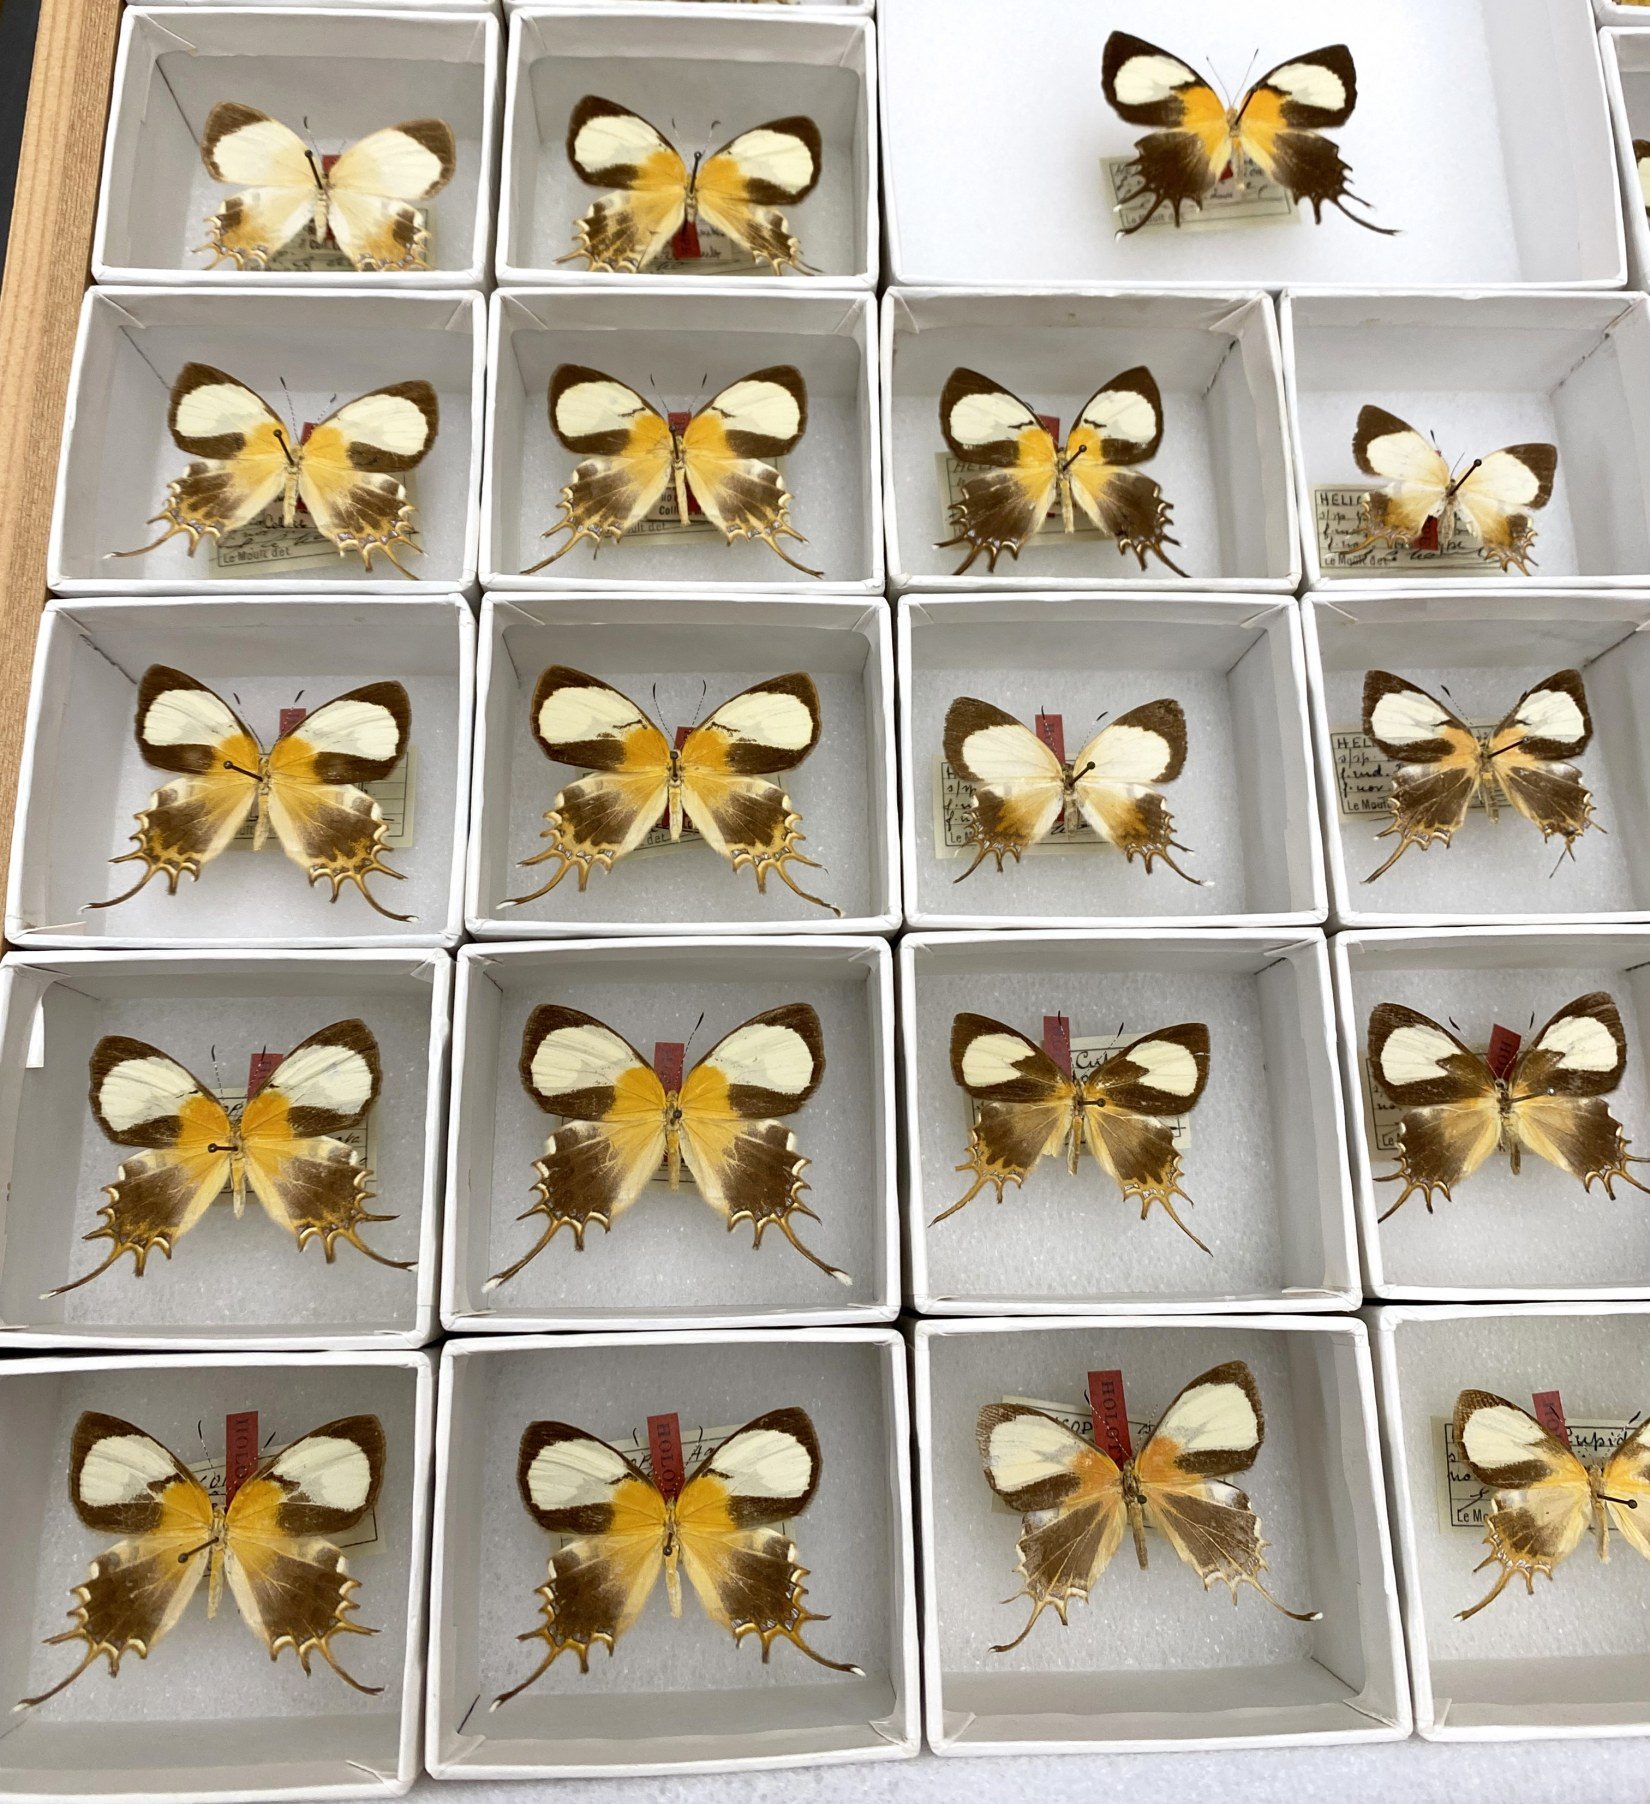 A drawer with tan, cream, and black tailed butterflies in individual unit trays.